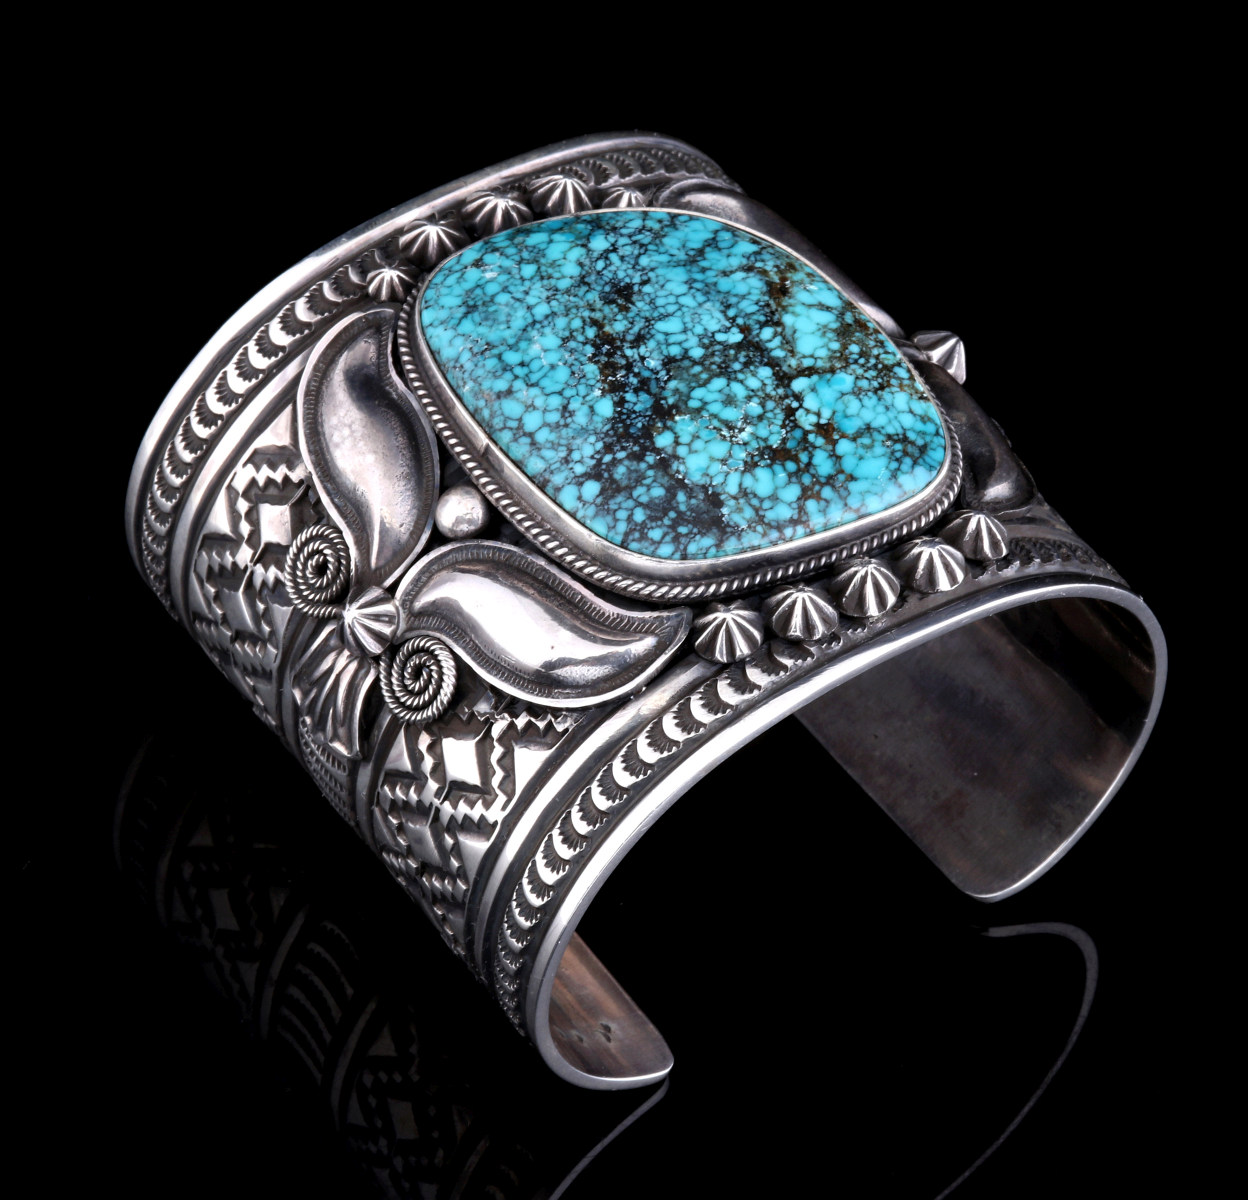 AN EXTRA WIDE ANDY CADMAN TURQUOISE CUFF BRACELET